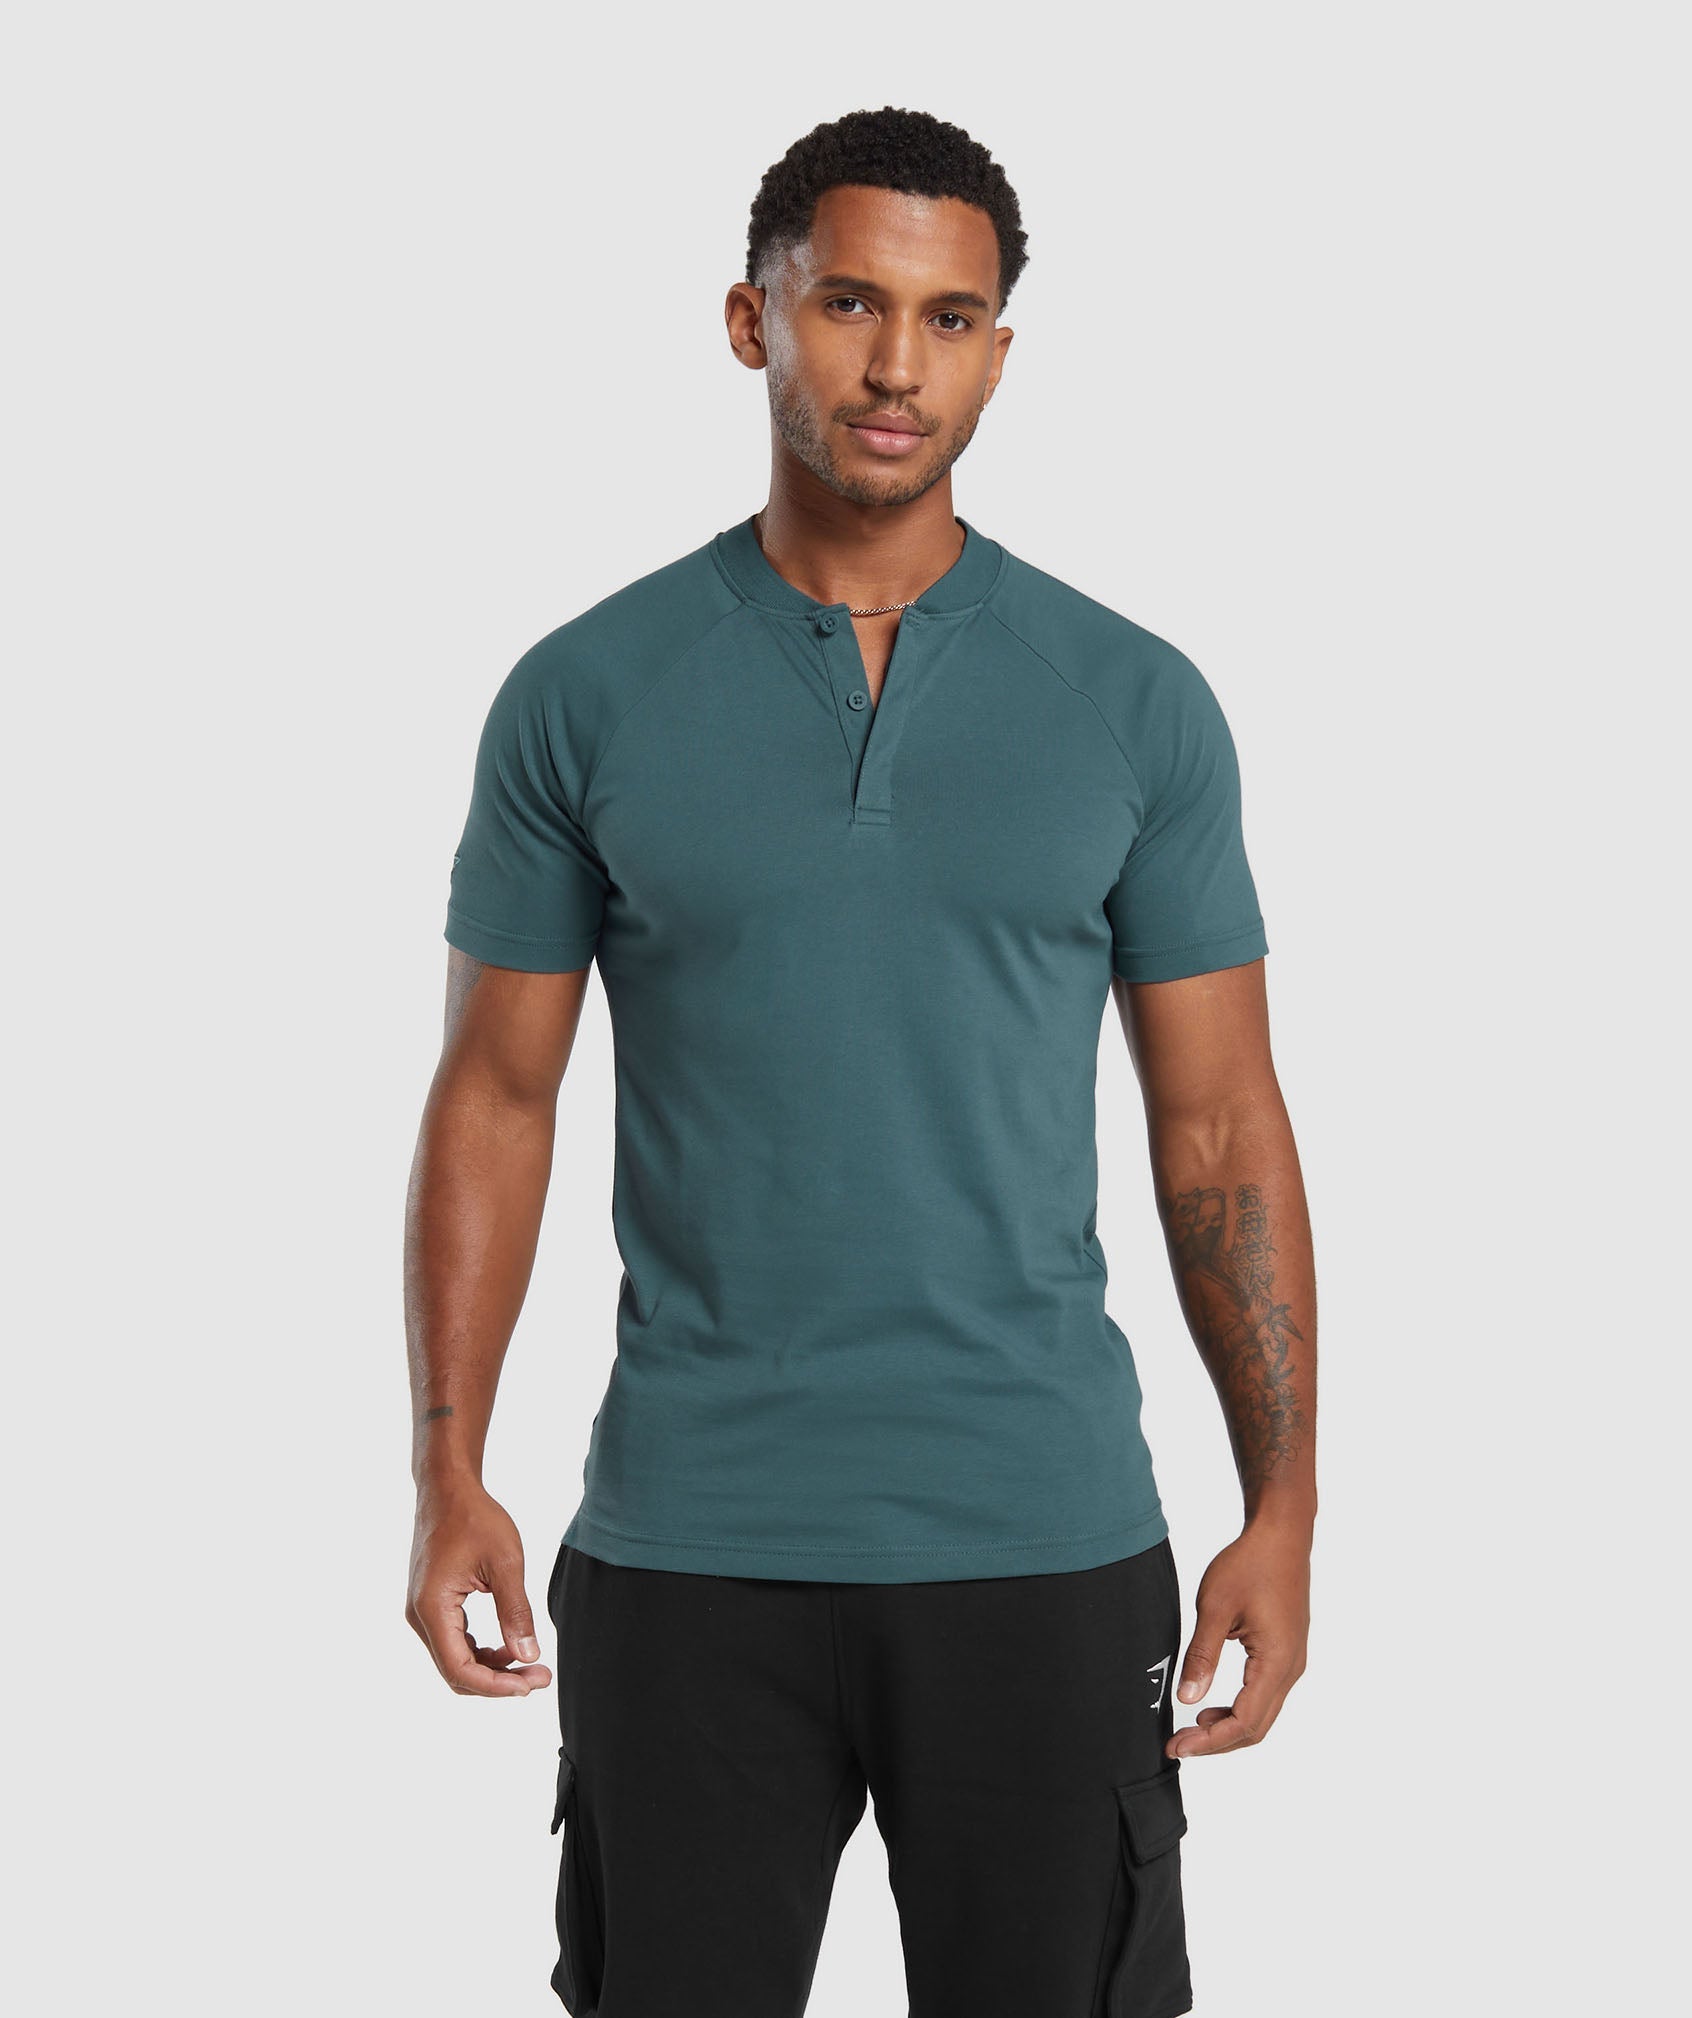 Rest Day Commute Polo Shirt in Smokey Teal - view 1